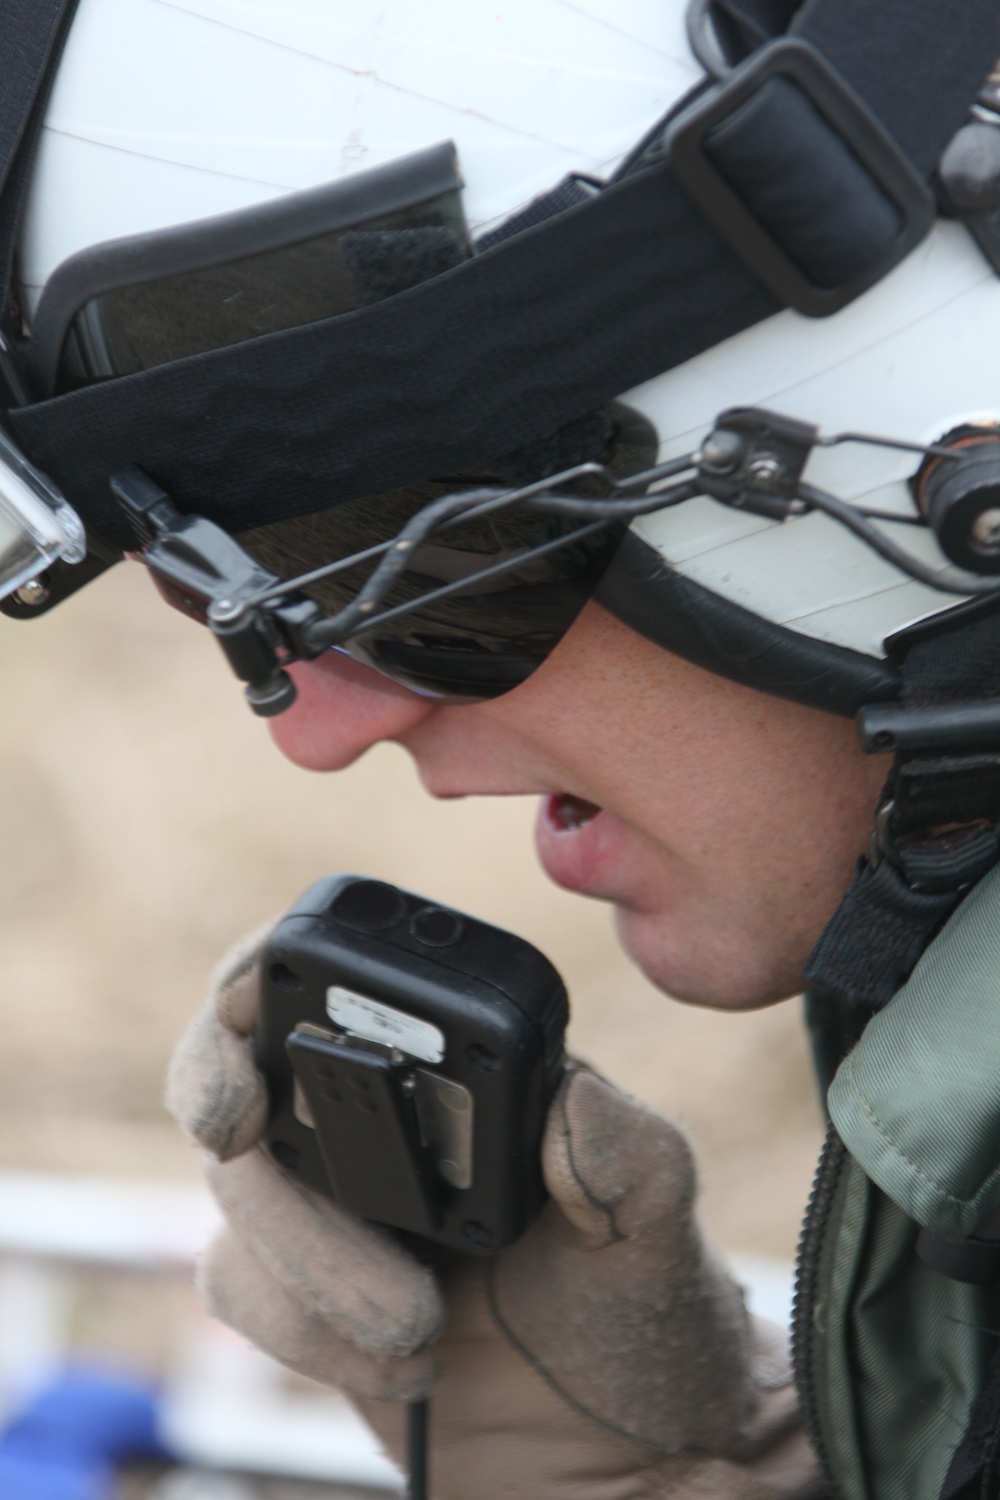 Search and Rescue Marines stay ready through constant training